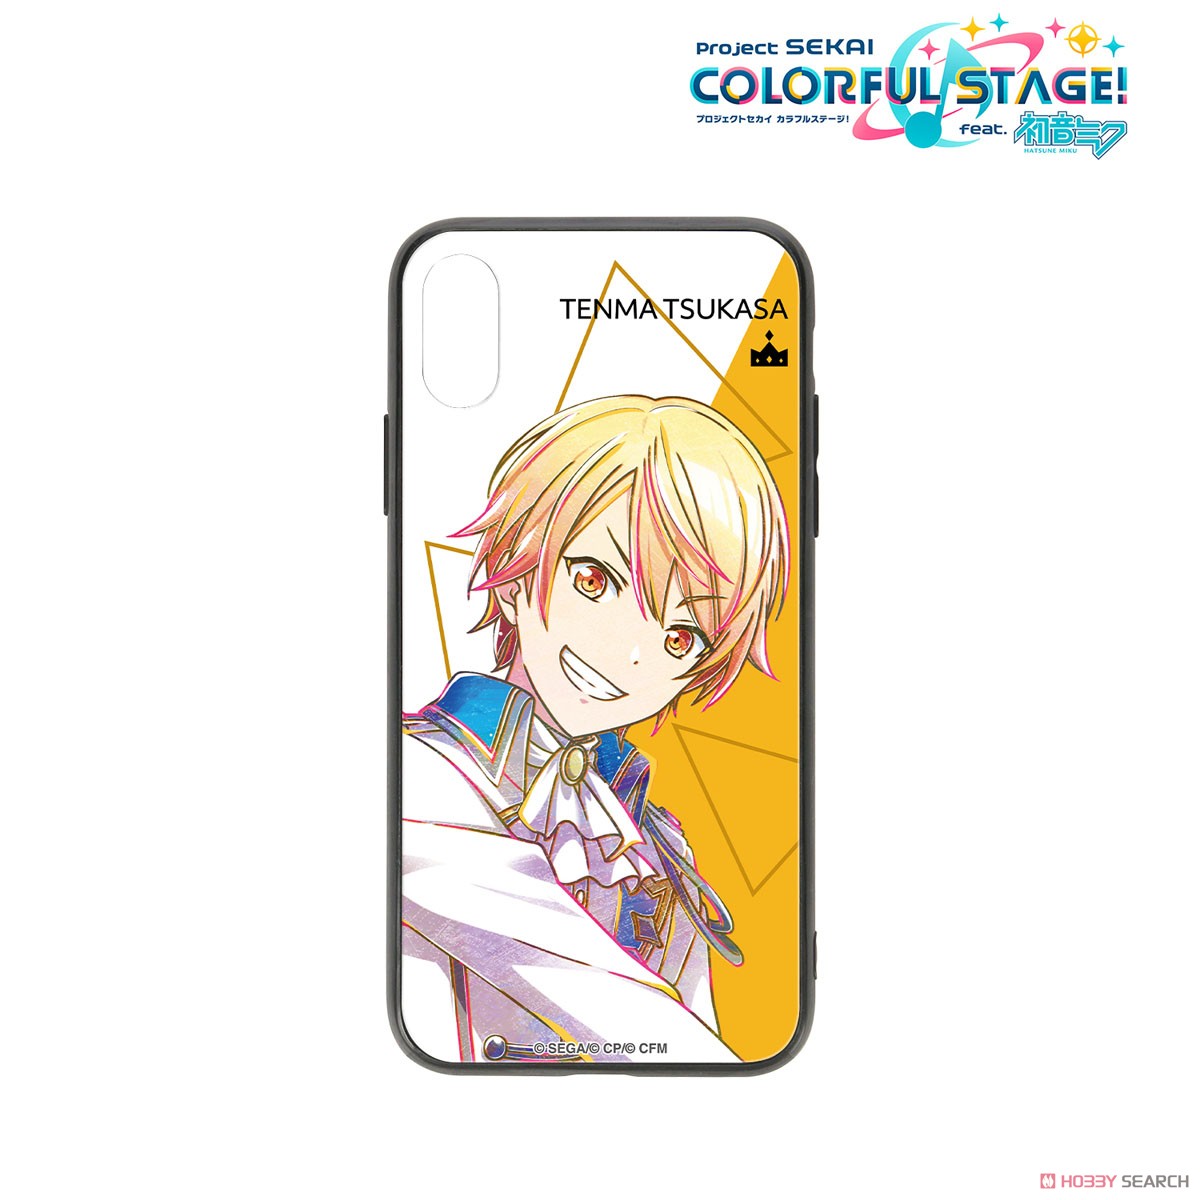 Project Sekai: Colorful Stage feat. Hatsune Miku Tsukasa Tenma Ani-Art Tempered Glass iPhone Case (for /iPhone 12 mini) (Anime Toy) Item picture1